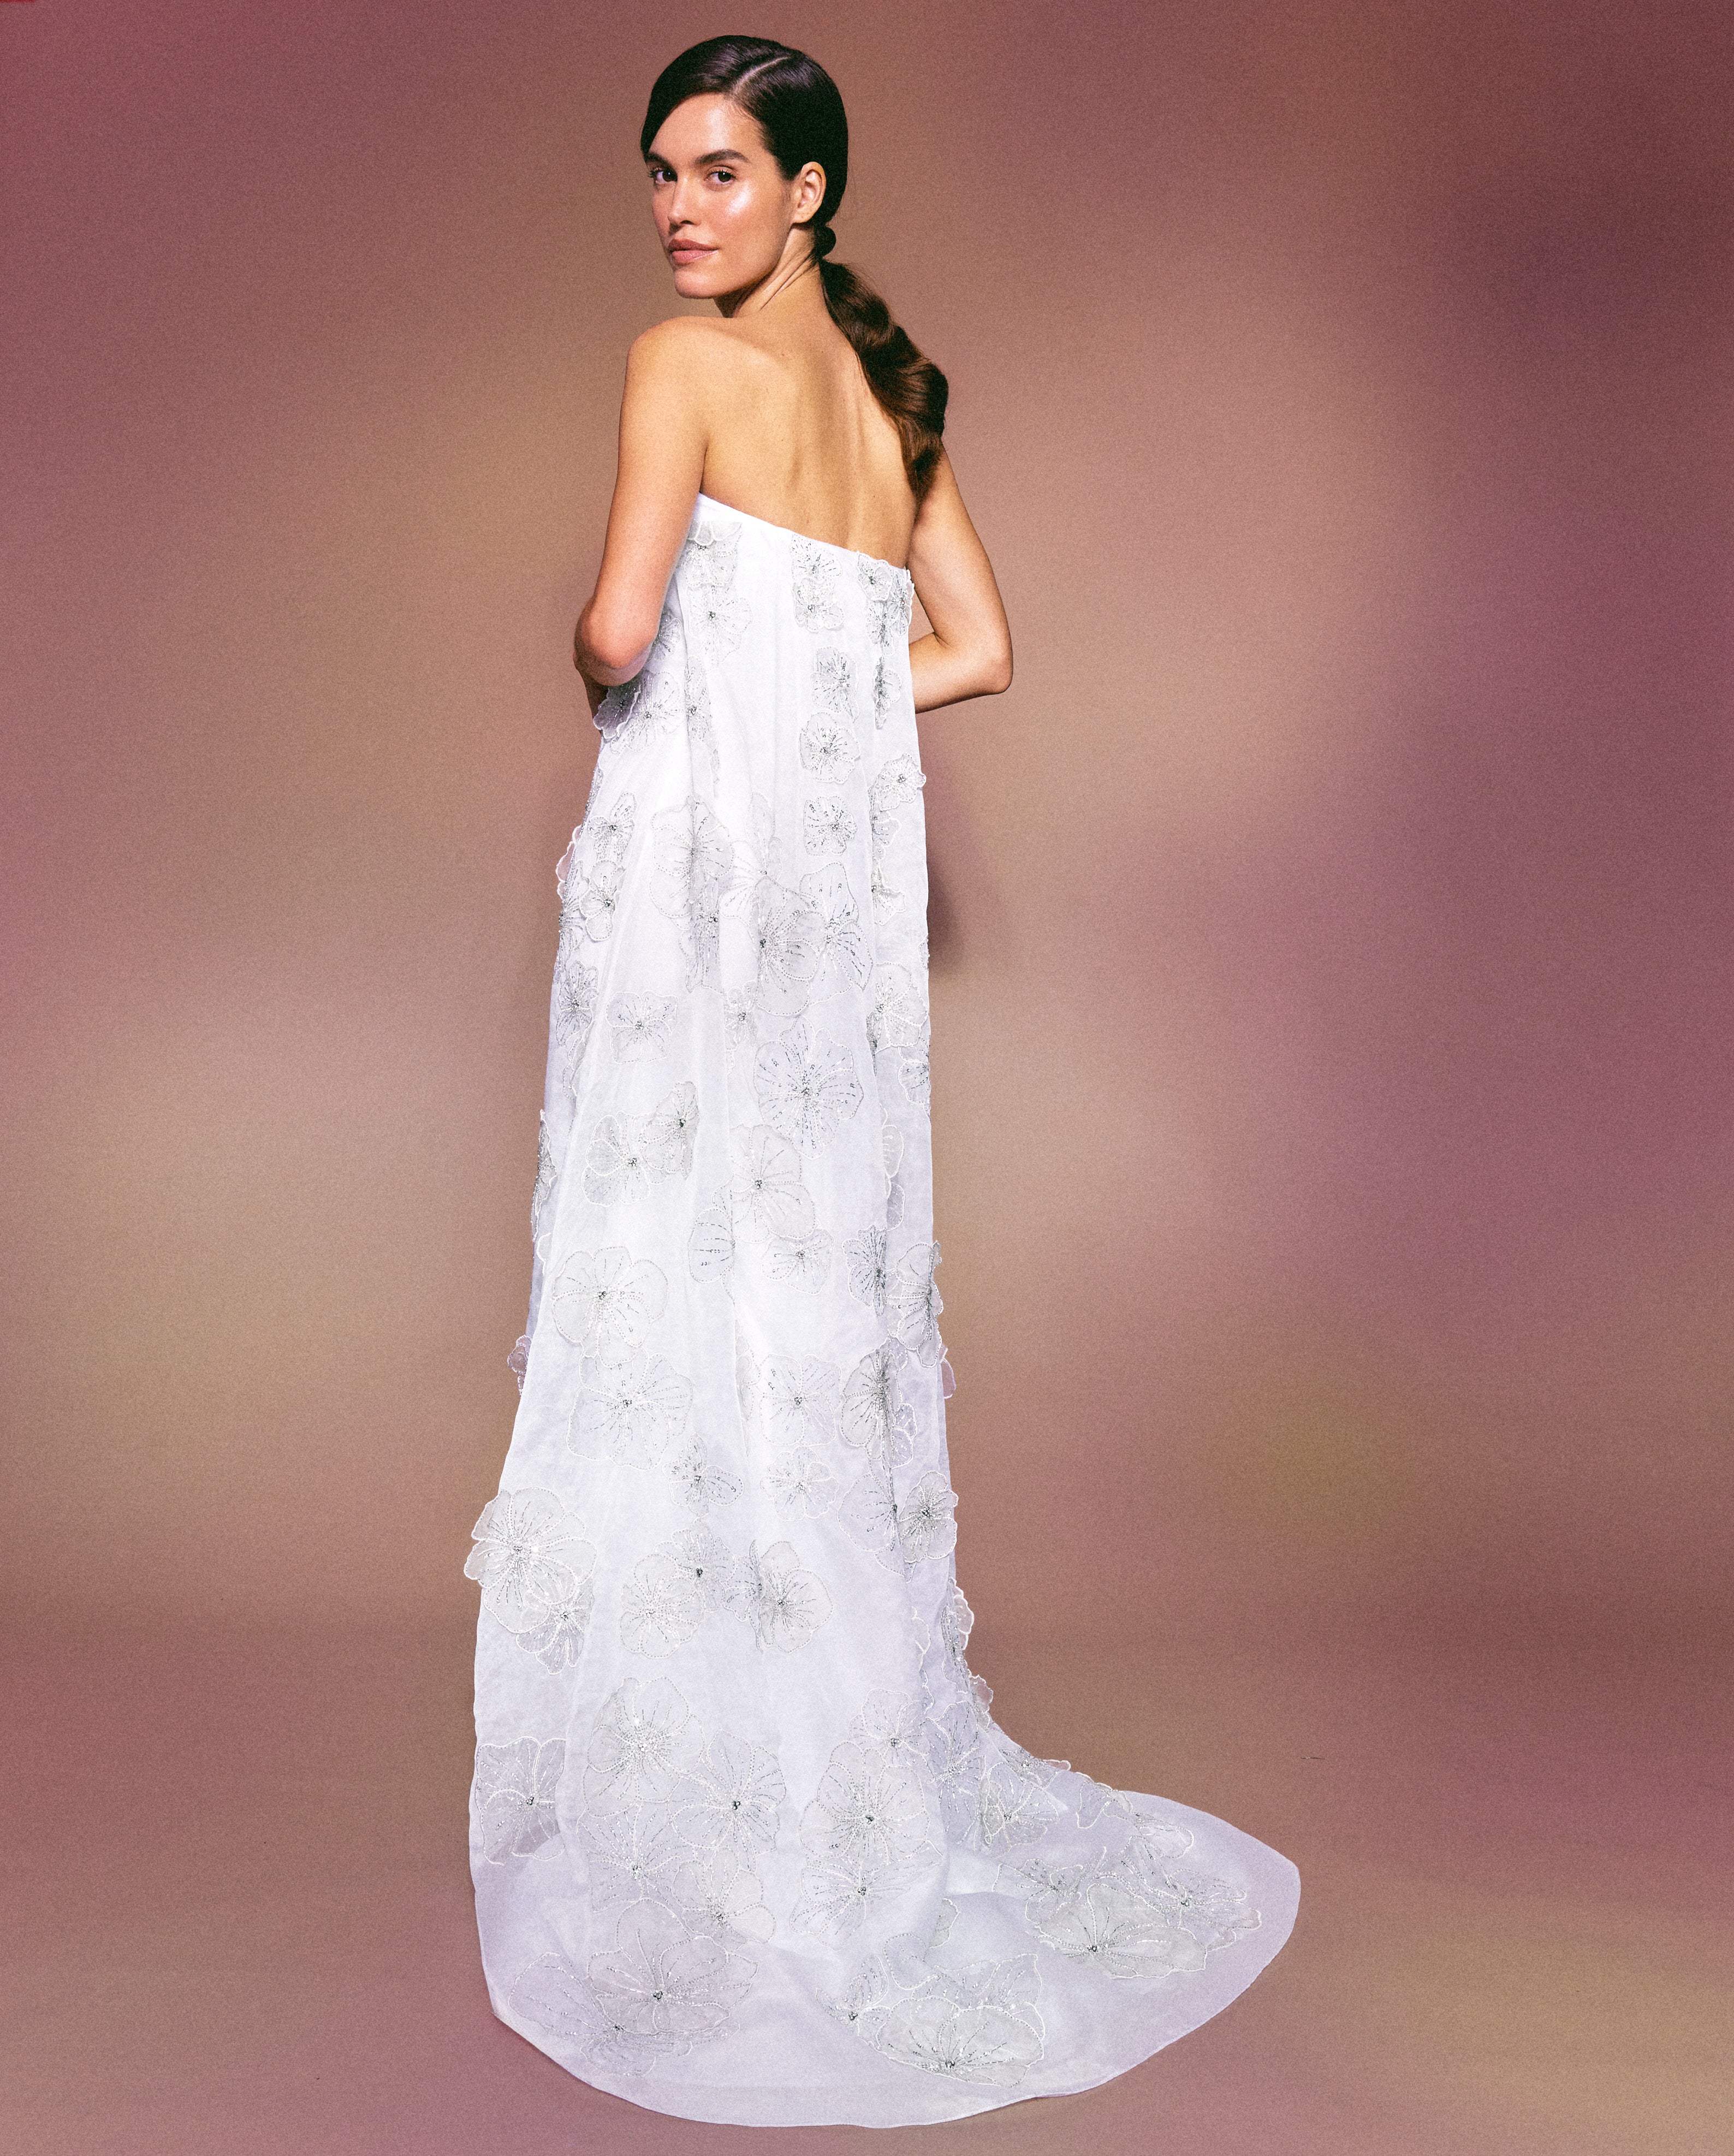 Skye Gown in White Organza with 3D Appliqué